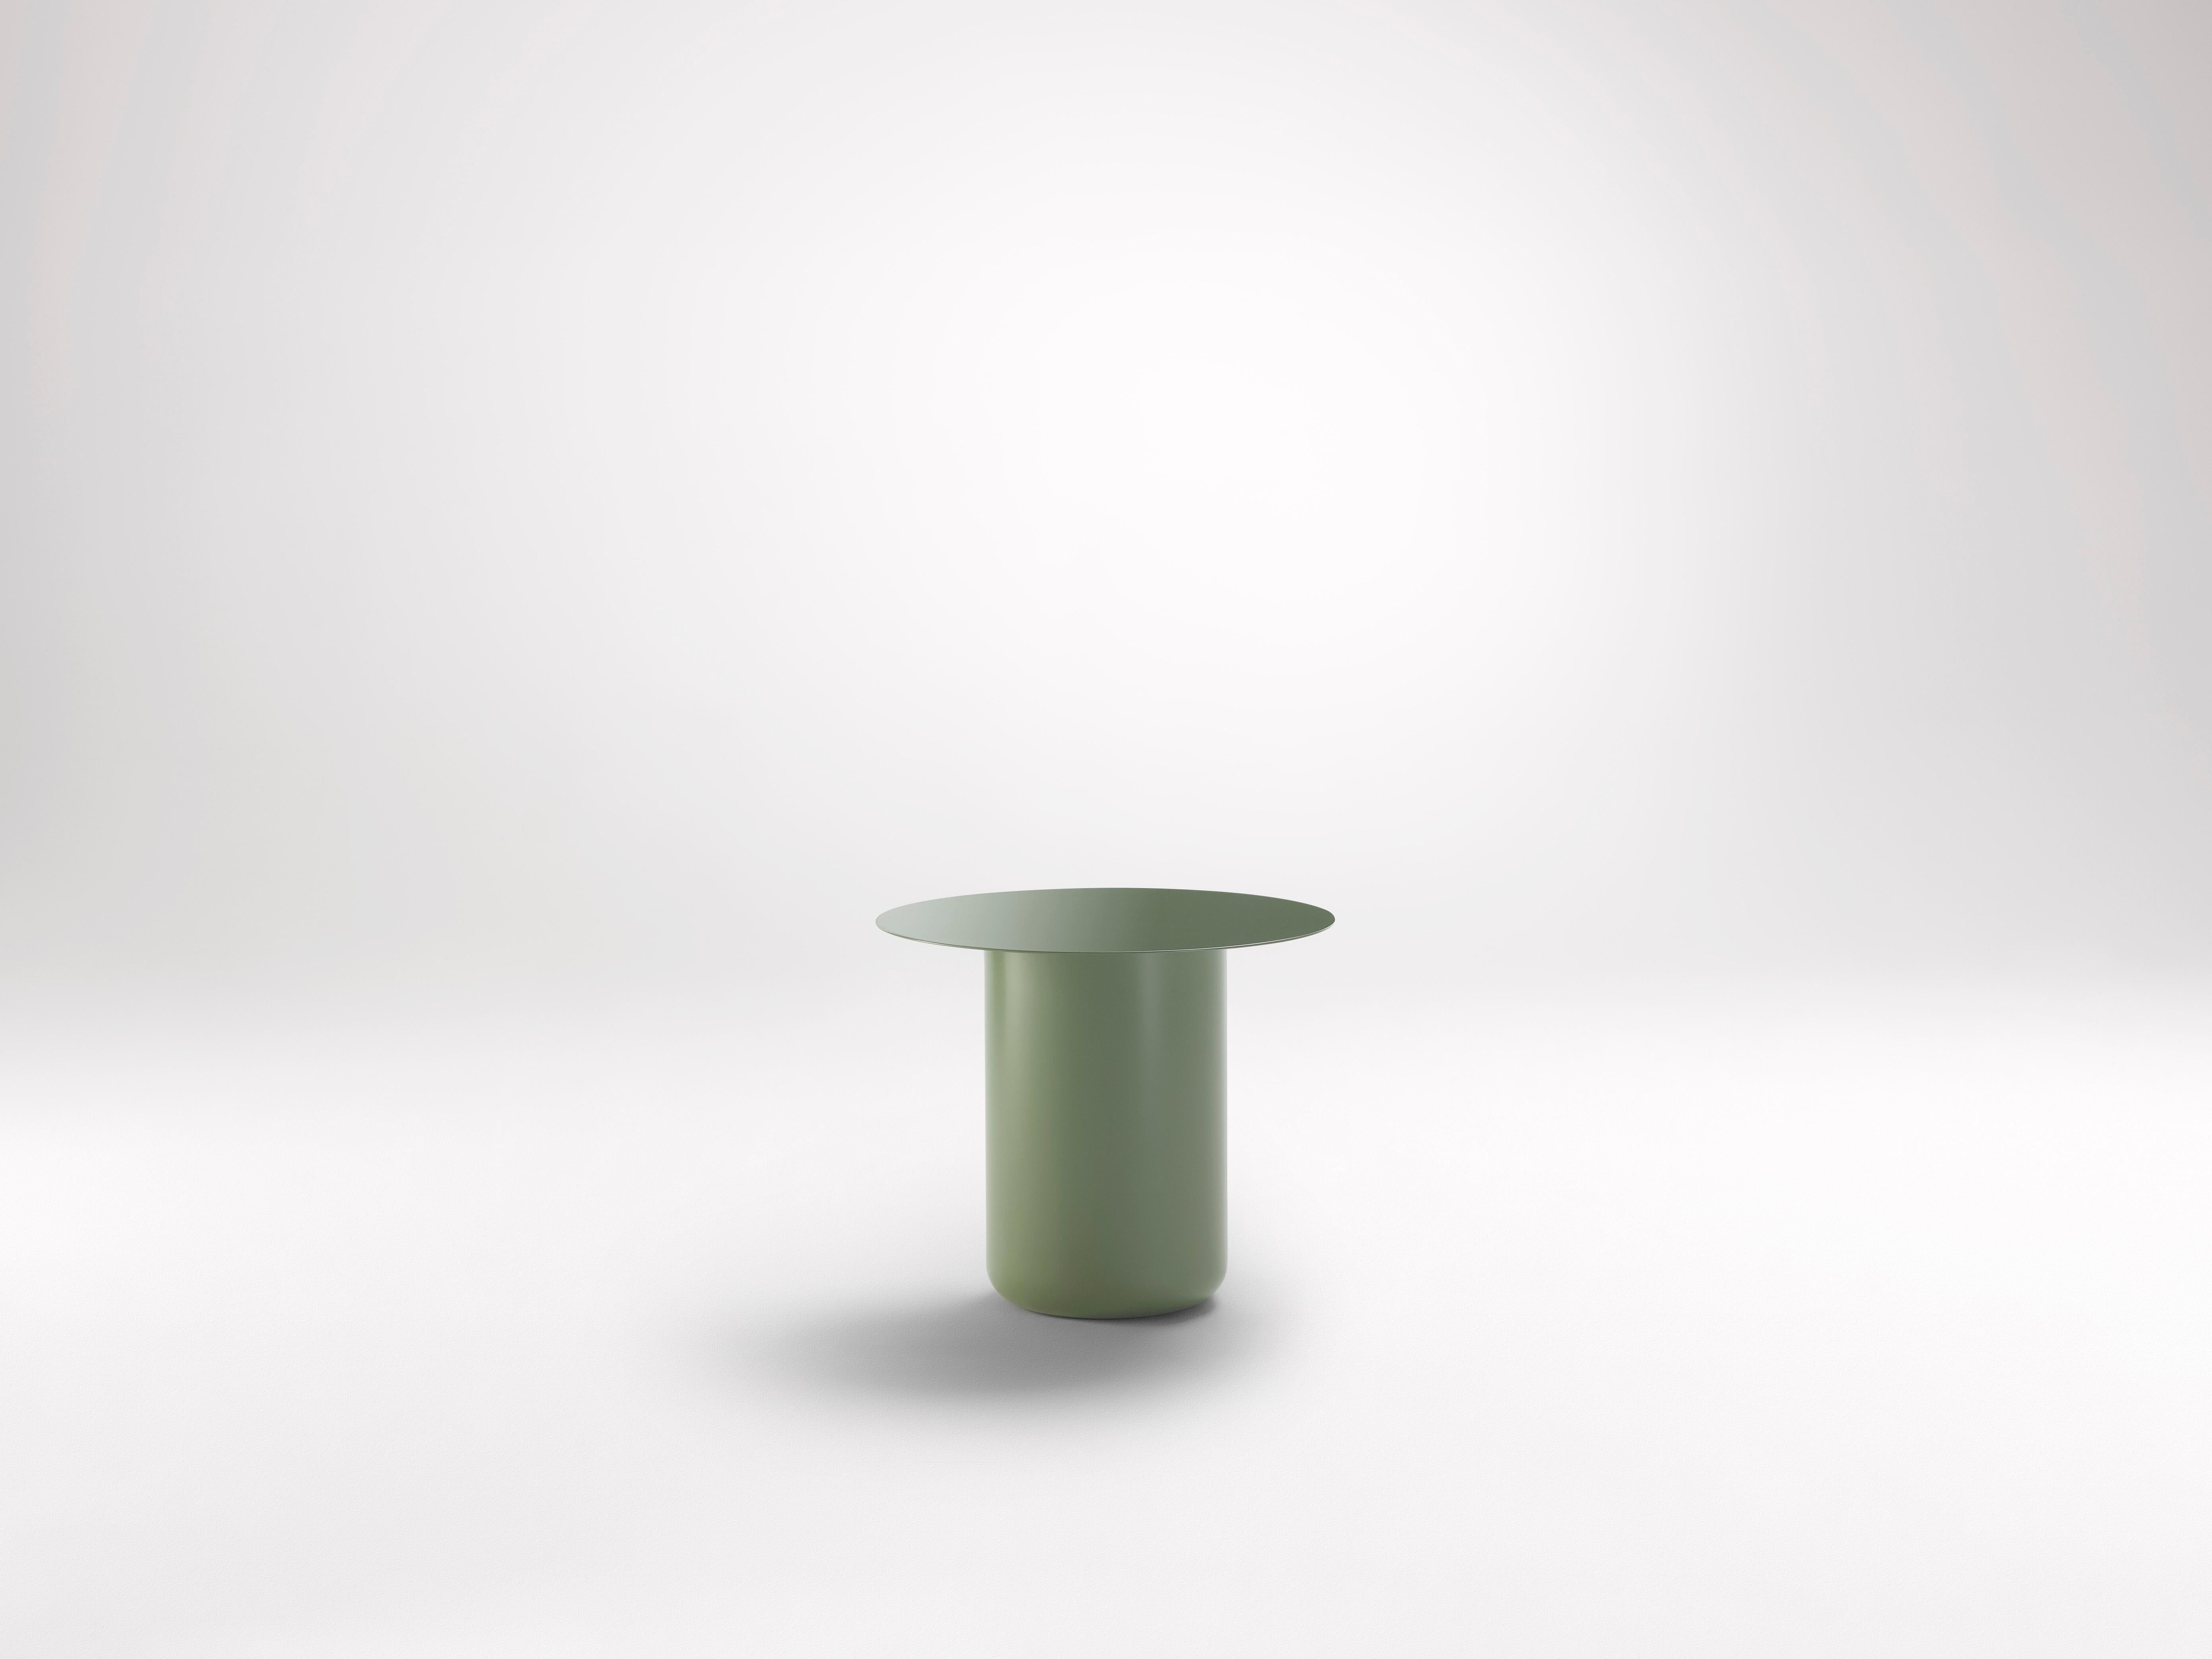 Pale Eucalypt Table 01 by Coco Flip
Dimensions: D 48 x W 48 x H 32 / 36 / 40 / 42 cm
Materials: Mild steel, powder-coated with zinc undercoat. 
Weight: 12kg

Coco Flip is a Melbourne based furniture and lighting design studio, run by us, Kate Stokes